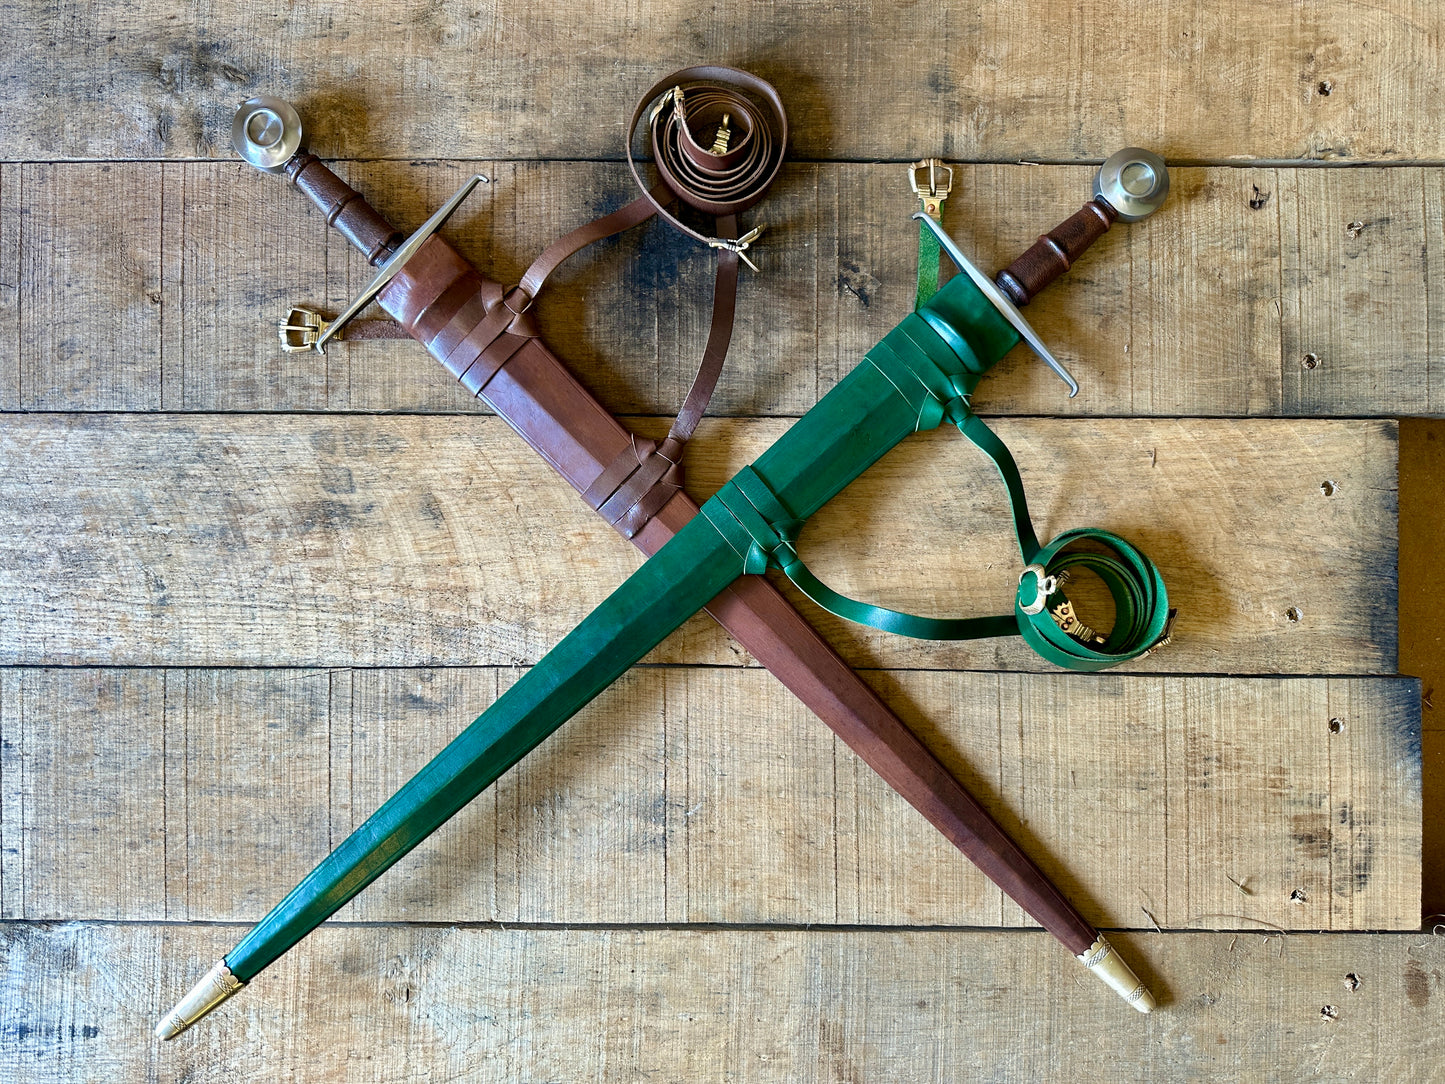 
                  
                    Castillon single handed sword. Two swords crossed, one in a green scabbard and one in a brown scabbard
                  
                